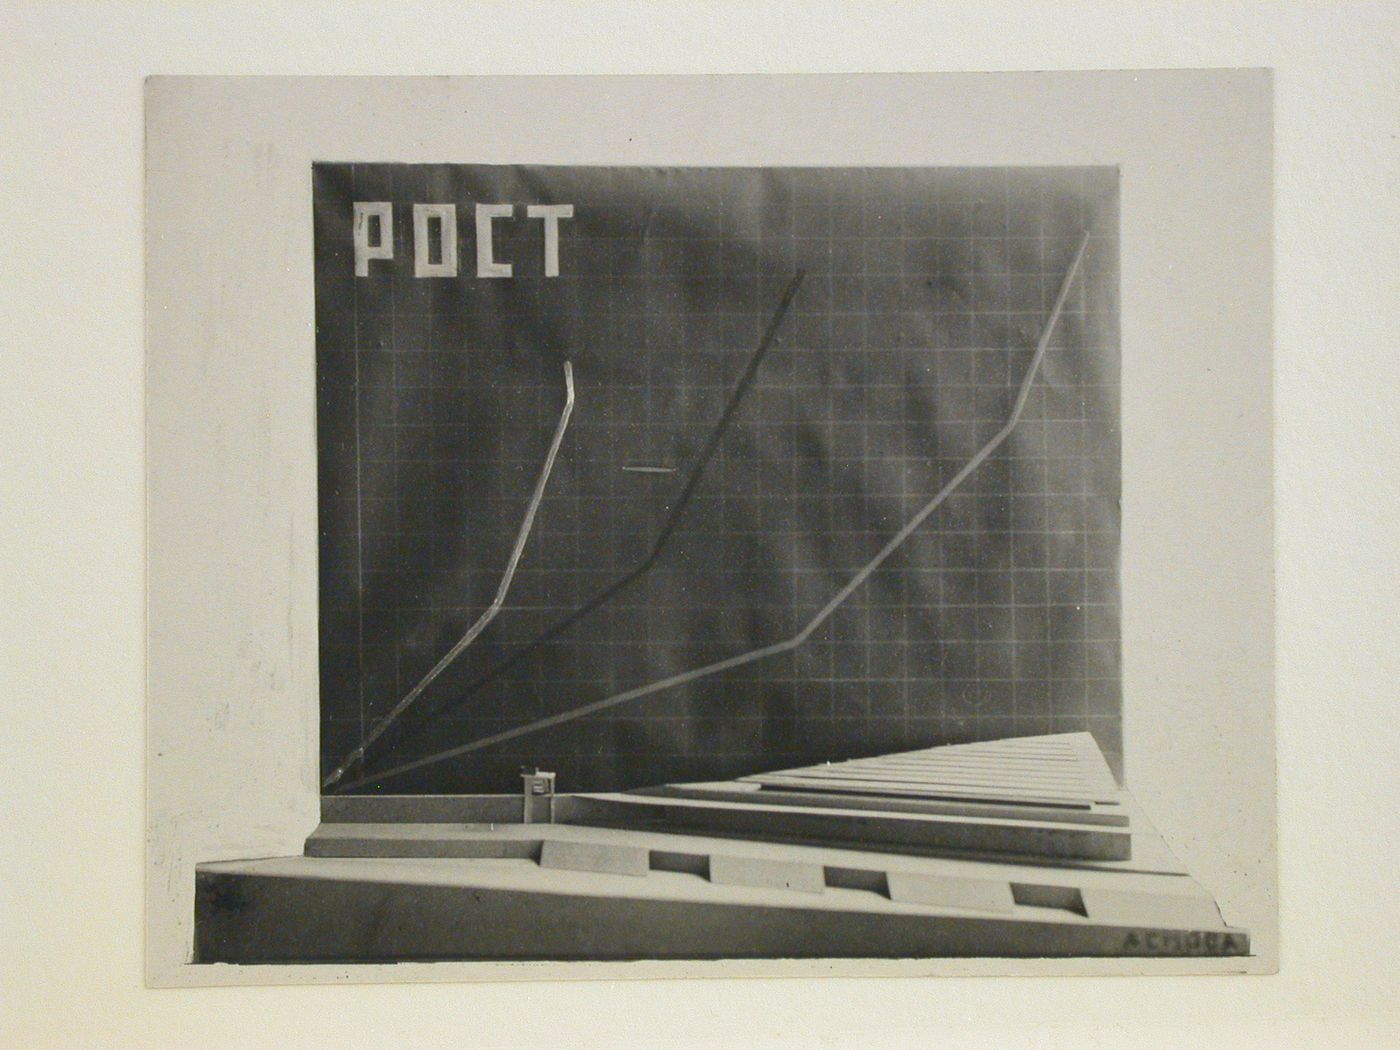 Photograph of a side elevation of a model for a Palace of Soviets showing a chart titled "ROST" [GROWTH], Moscow